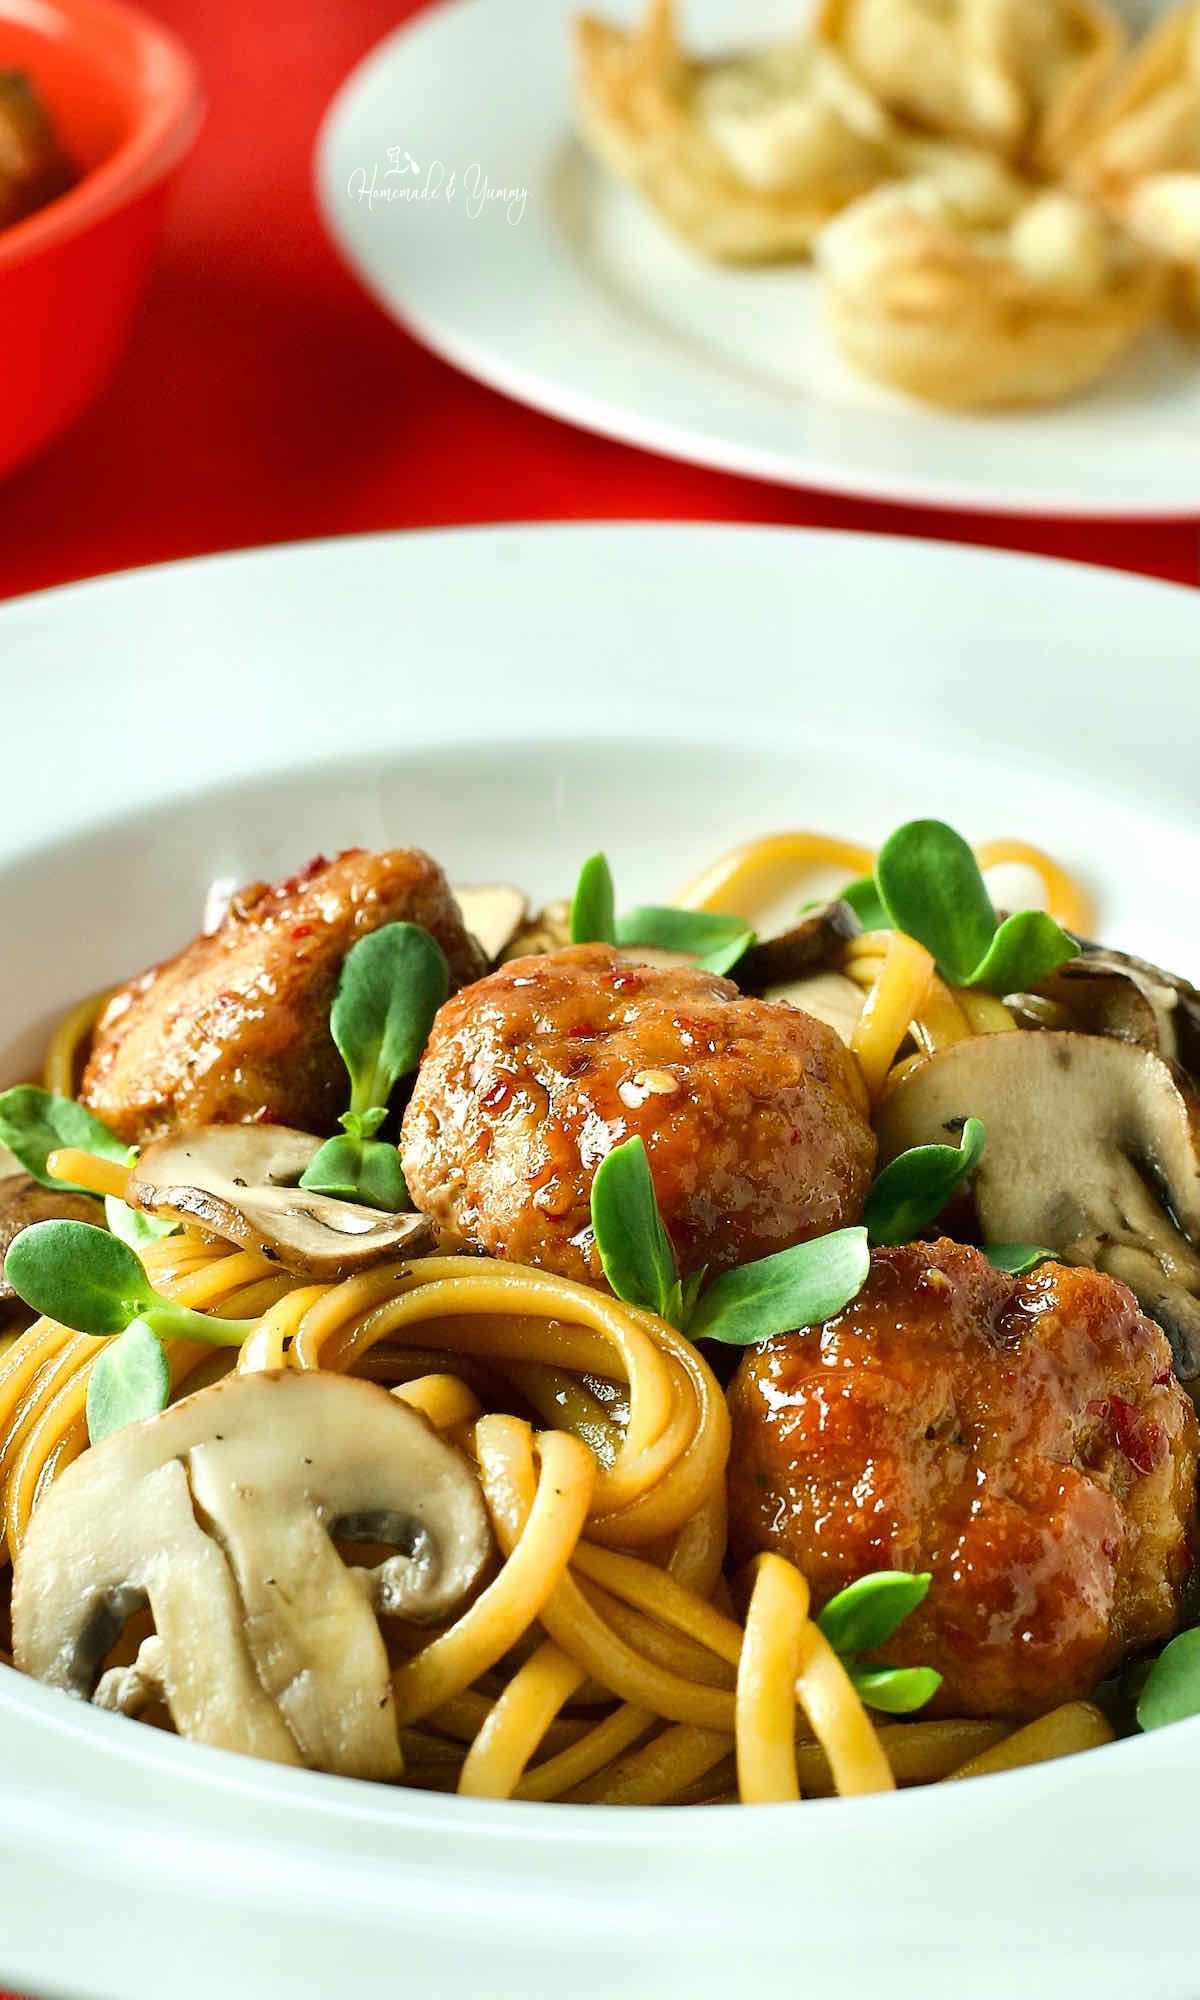 Chinese pork meatballs with spaghetti noodles.